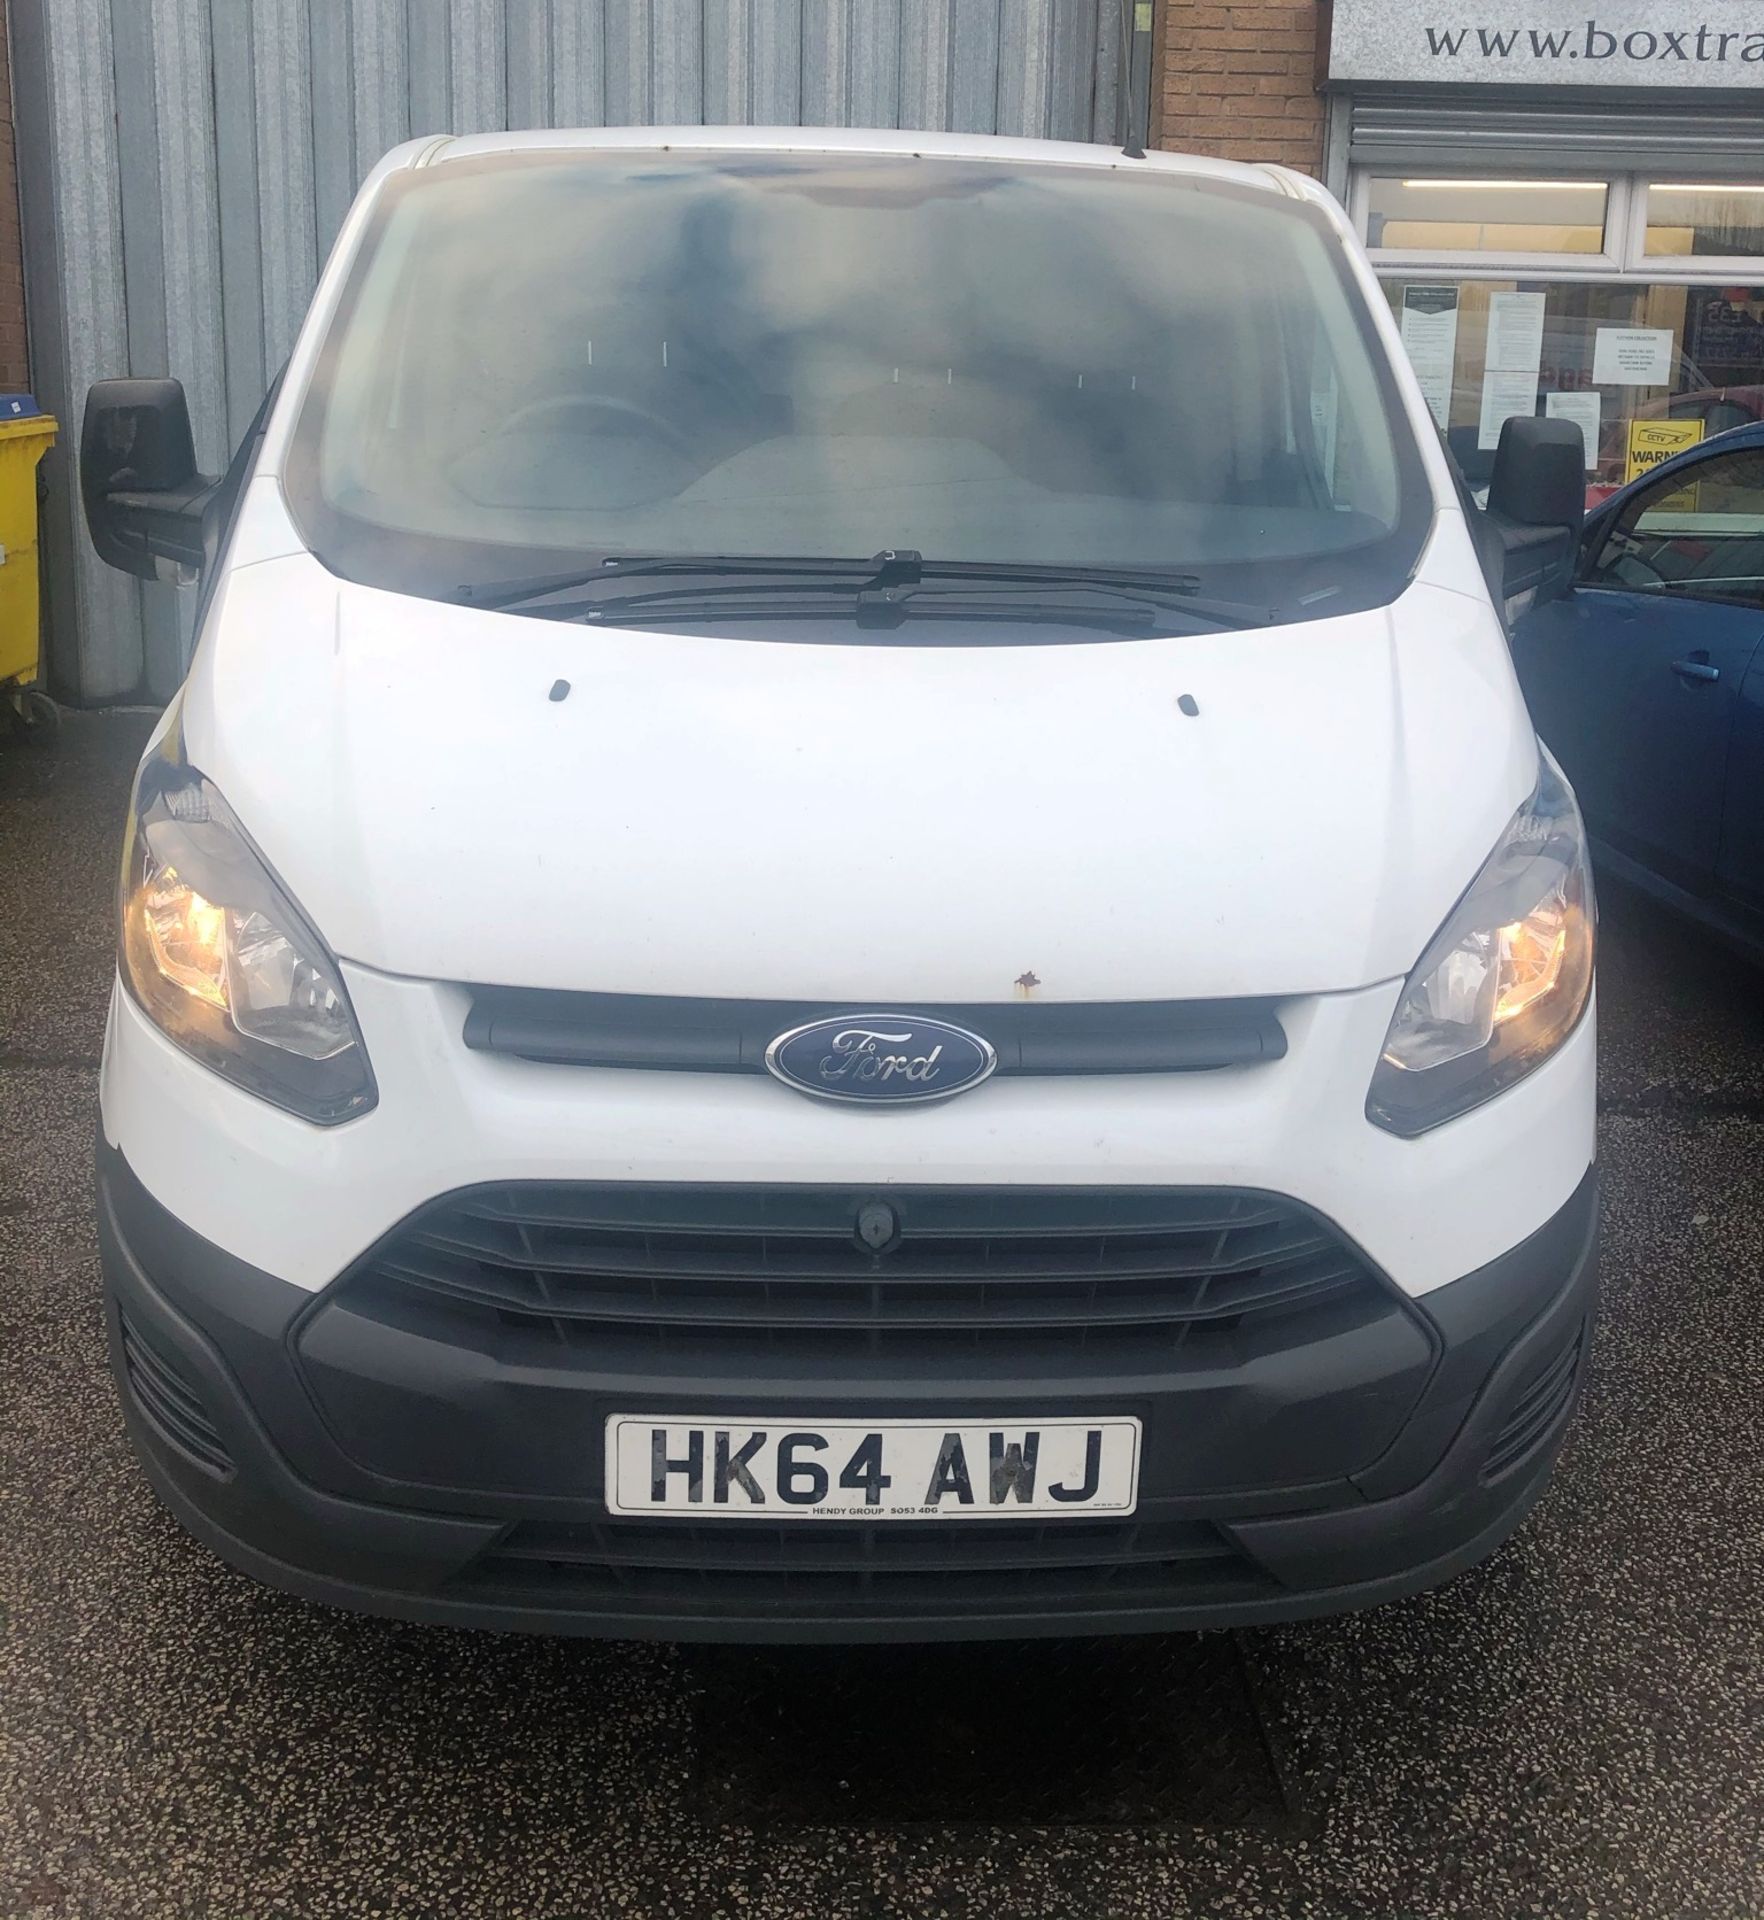 Ford Transit Custom 290 Eco-Te Panel Van | 64 Plate | 118,760 Mileage | HPI Checked - Image 8 of 13